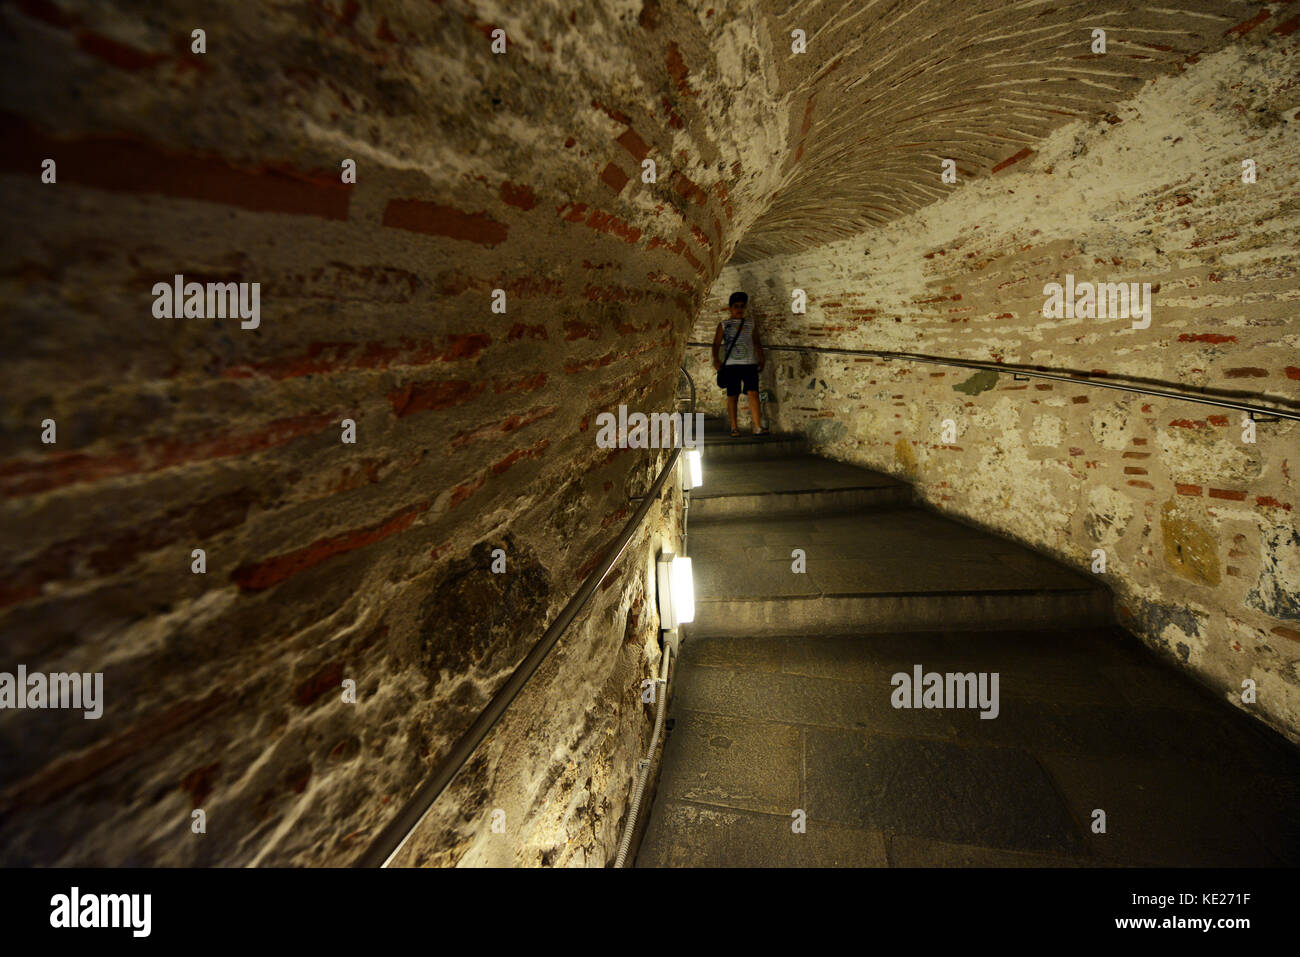 Climbing up inside the White Tower of Thessaloniki. Stock Photo